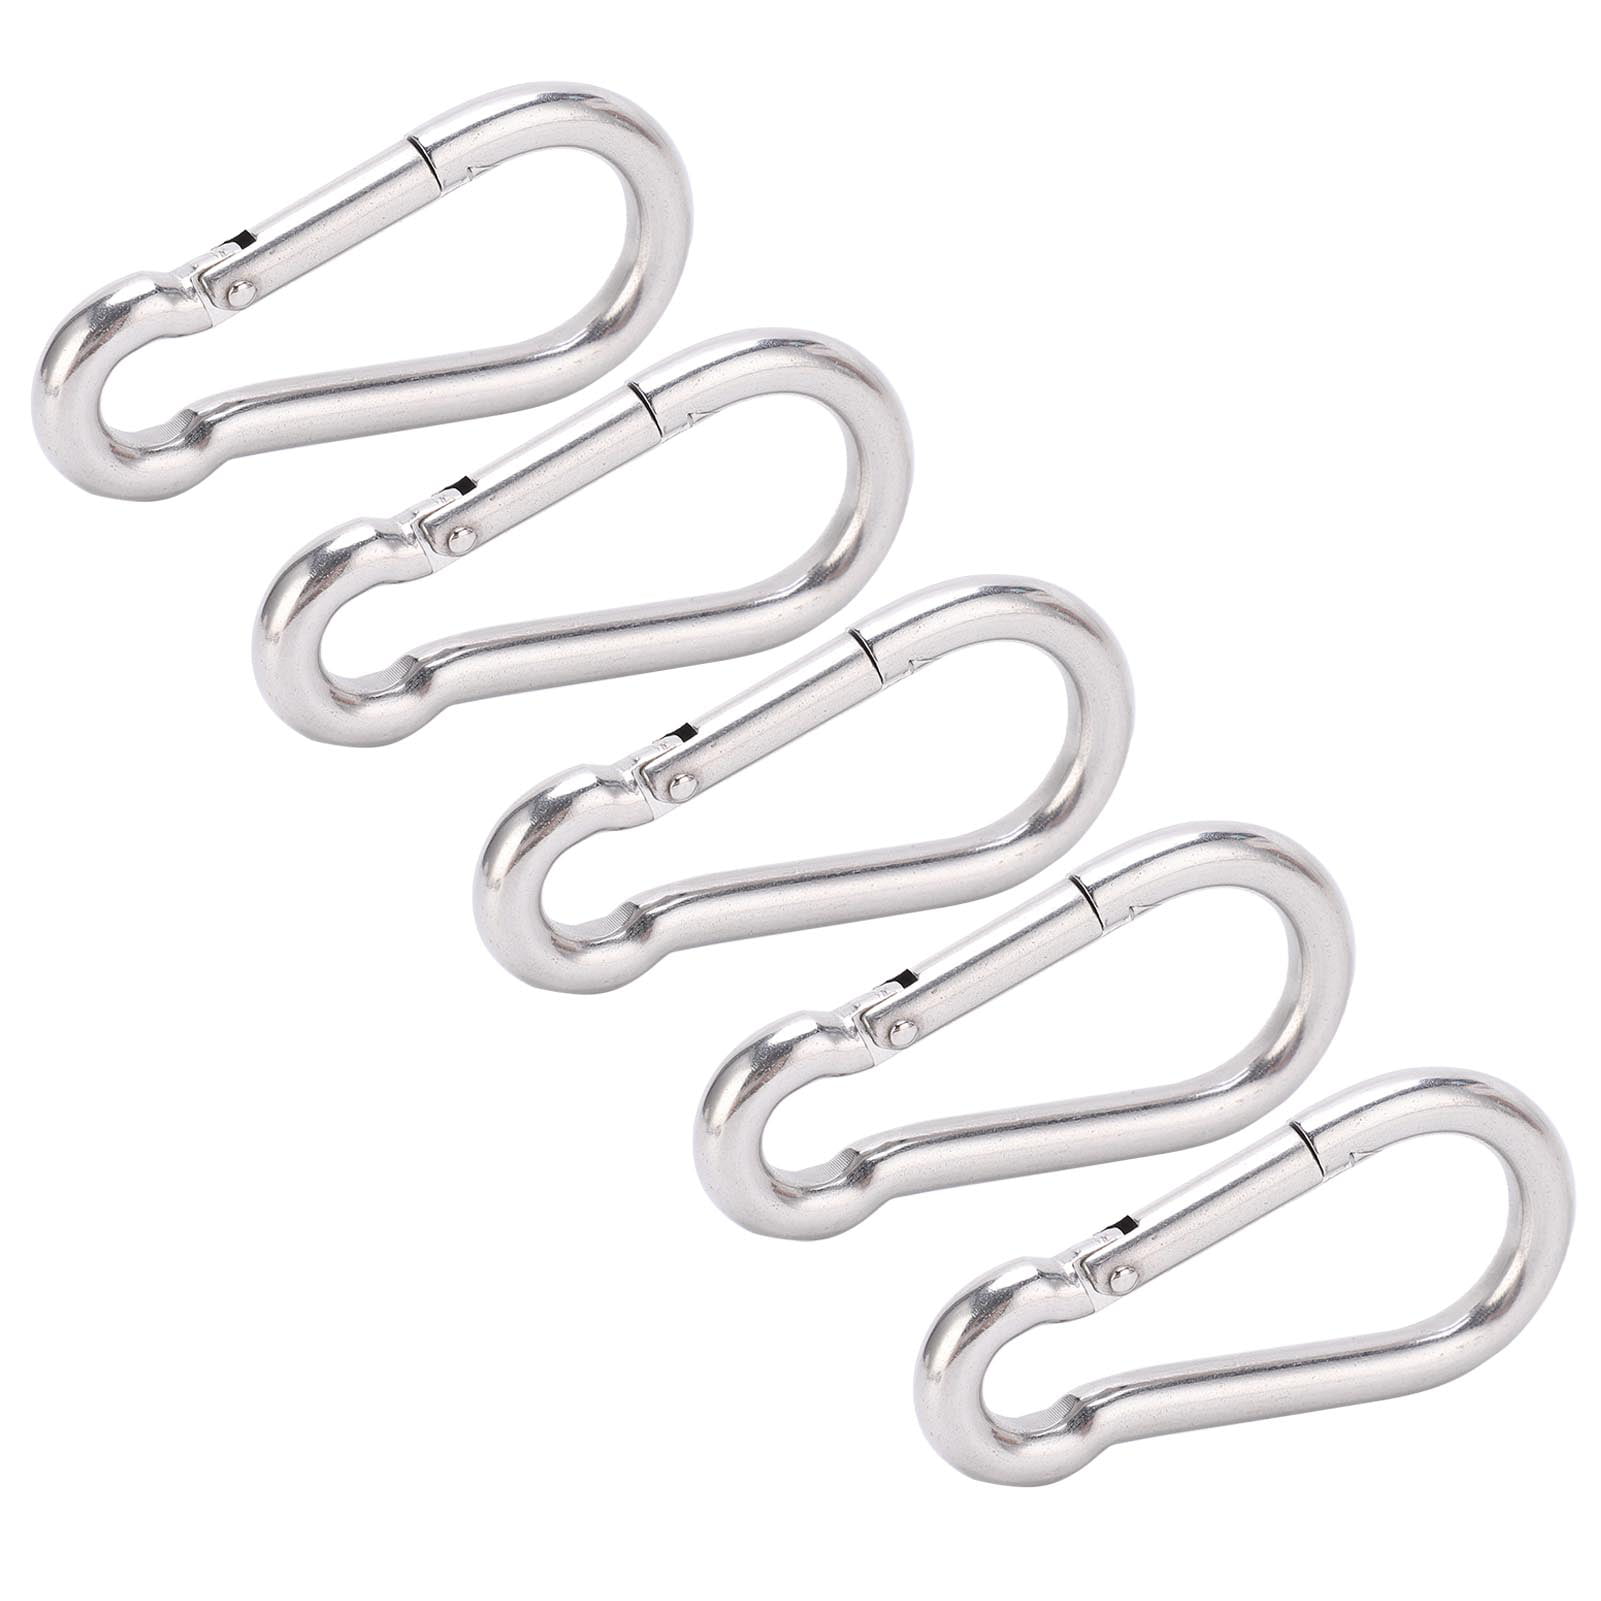 5pcs 80mm Carabiner Clip Stainless Steel Heavy Duty Spring Snap Hook Climbings 